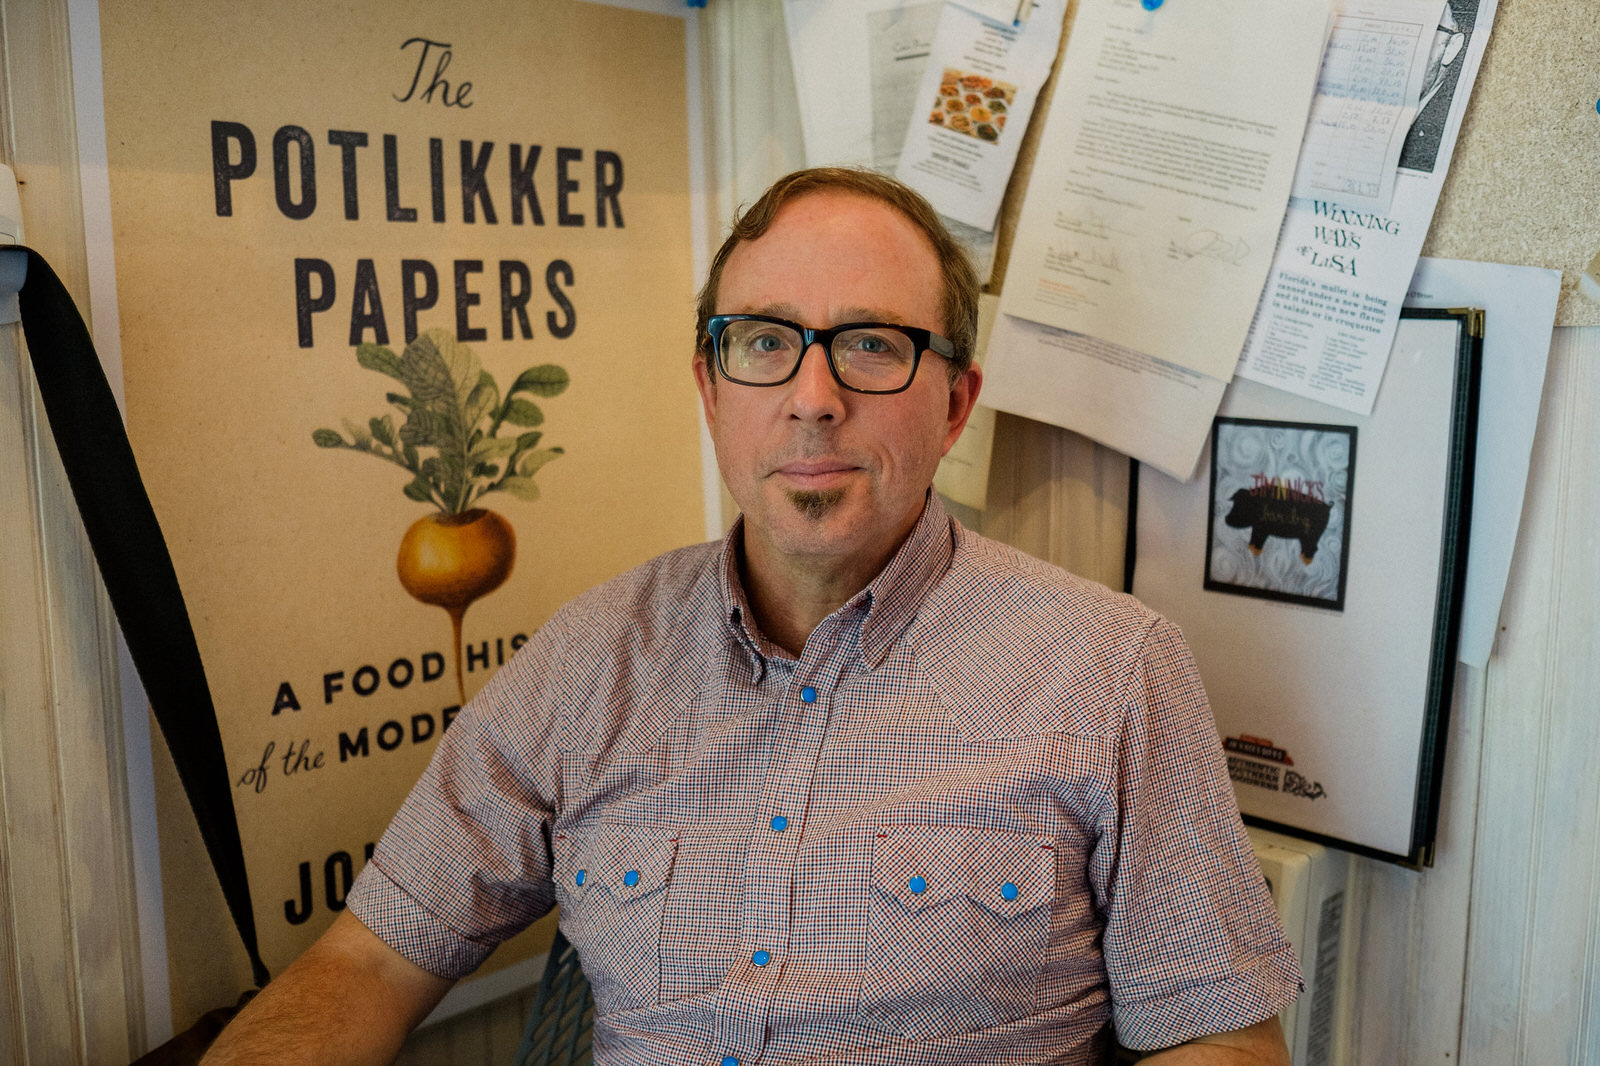 The Potlikker Papers PDF Free Download